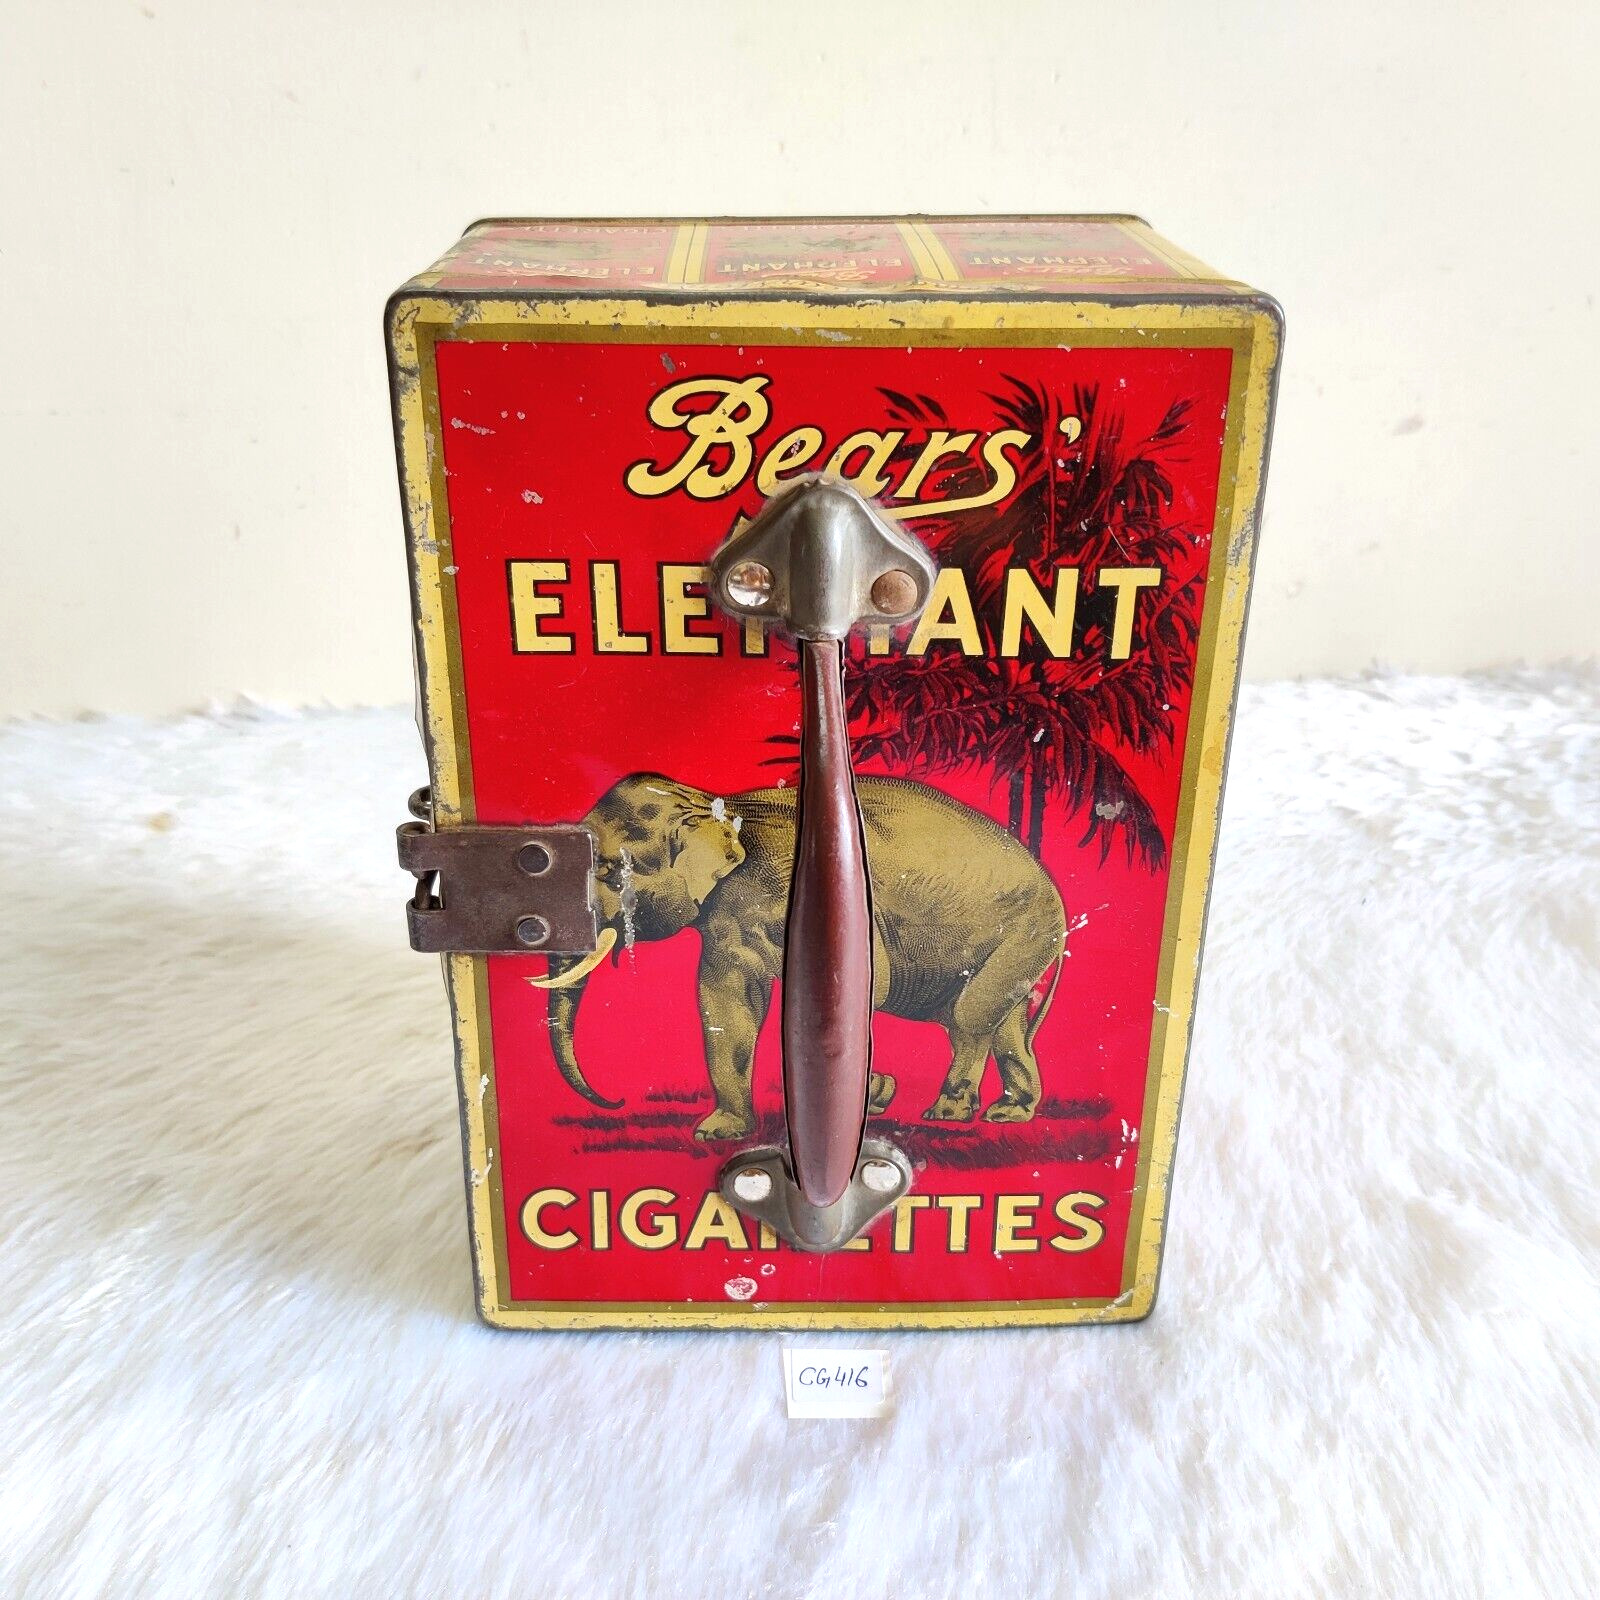 1930s Vintage Bears Elephant Cigarette Advertising Tin Box Old Collectible CG416